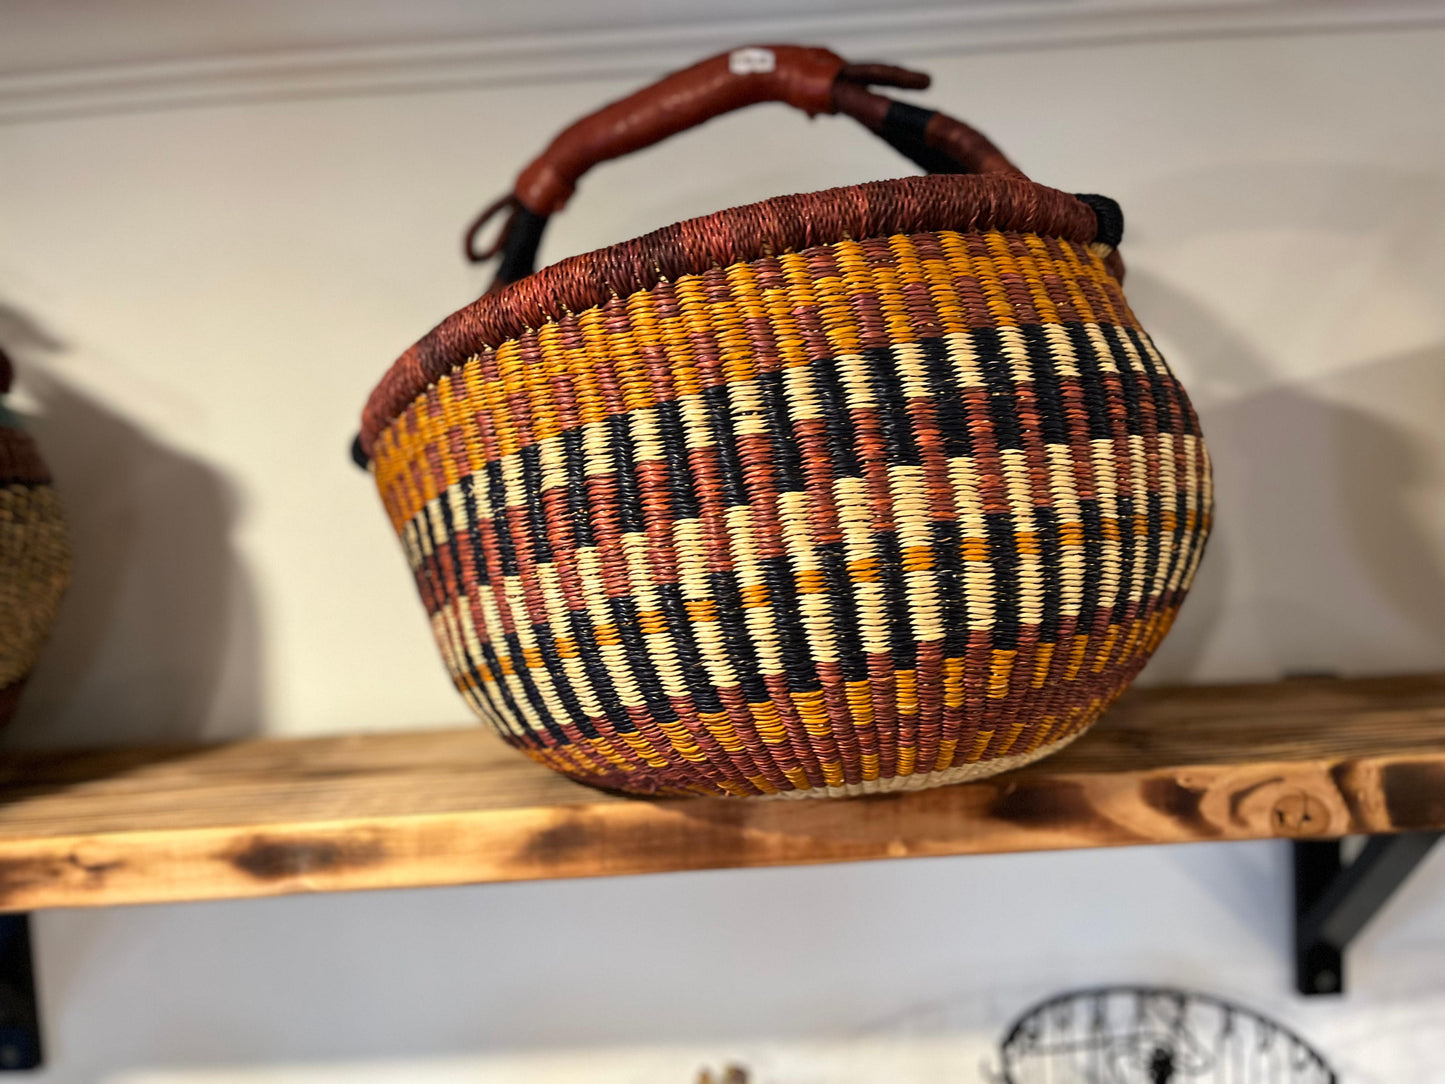 Large Woven Baskets Made in Ghana